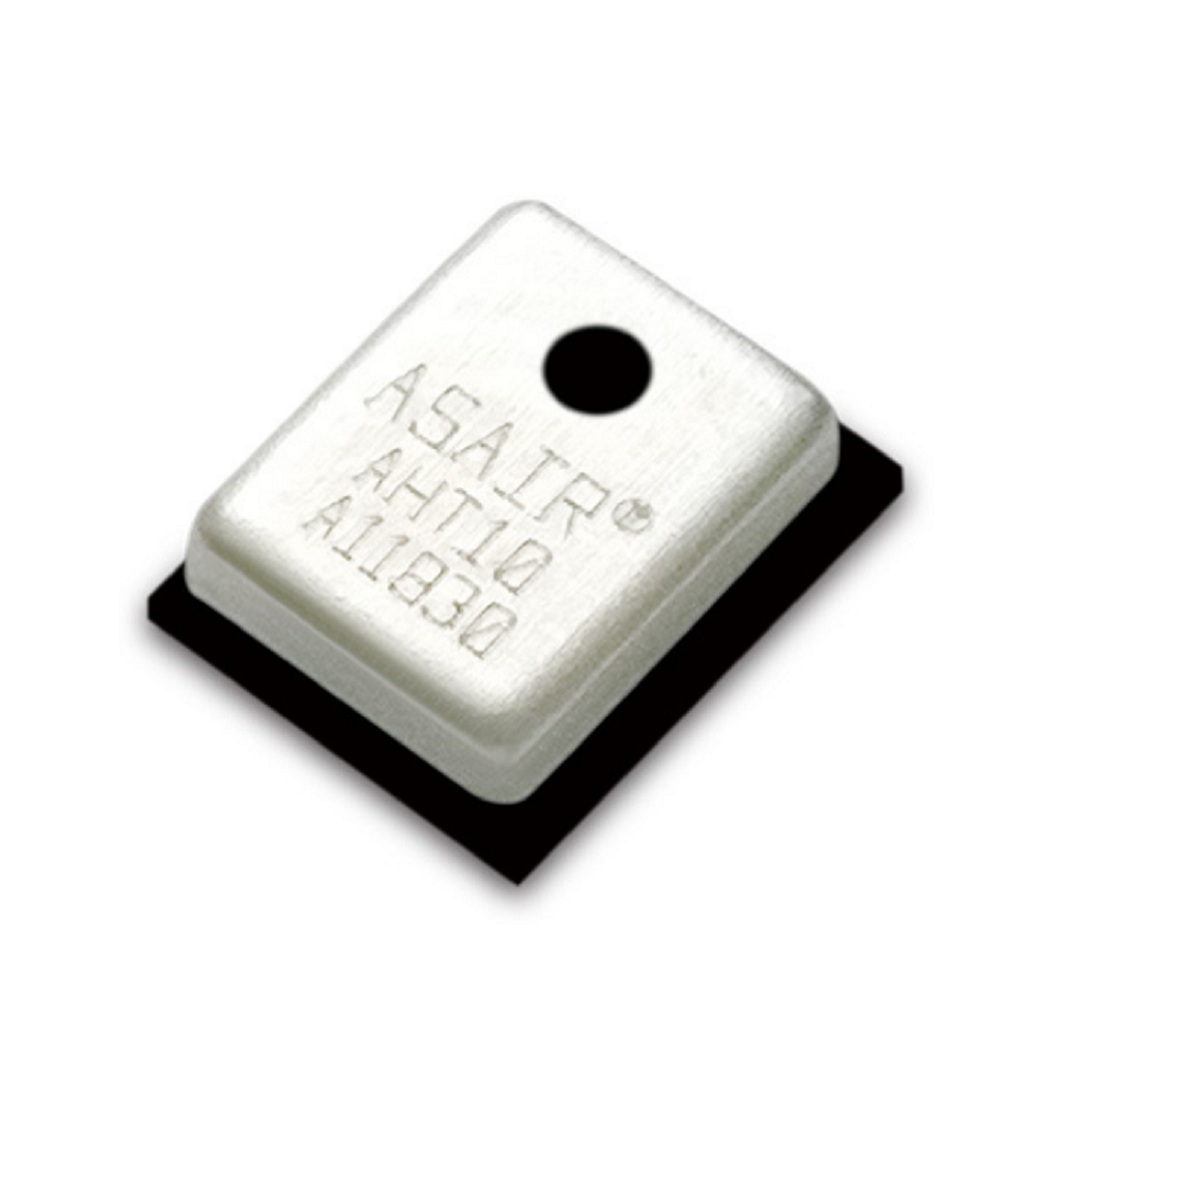 5-Pieces-AHT10-Integrated-Temperature-and-Humidity-Sensor-Patch-Packaged-Temperature-Sensor-1557259-2